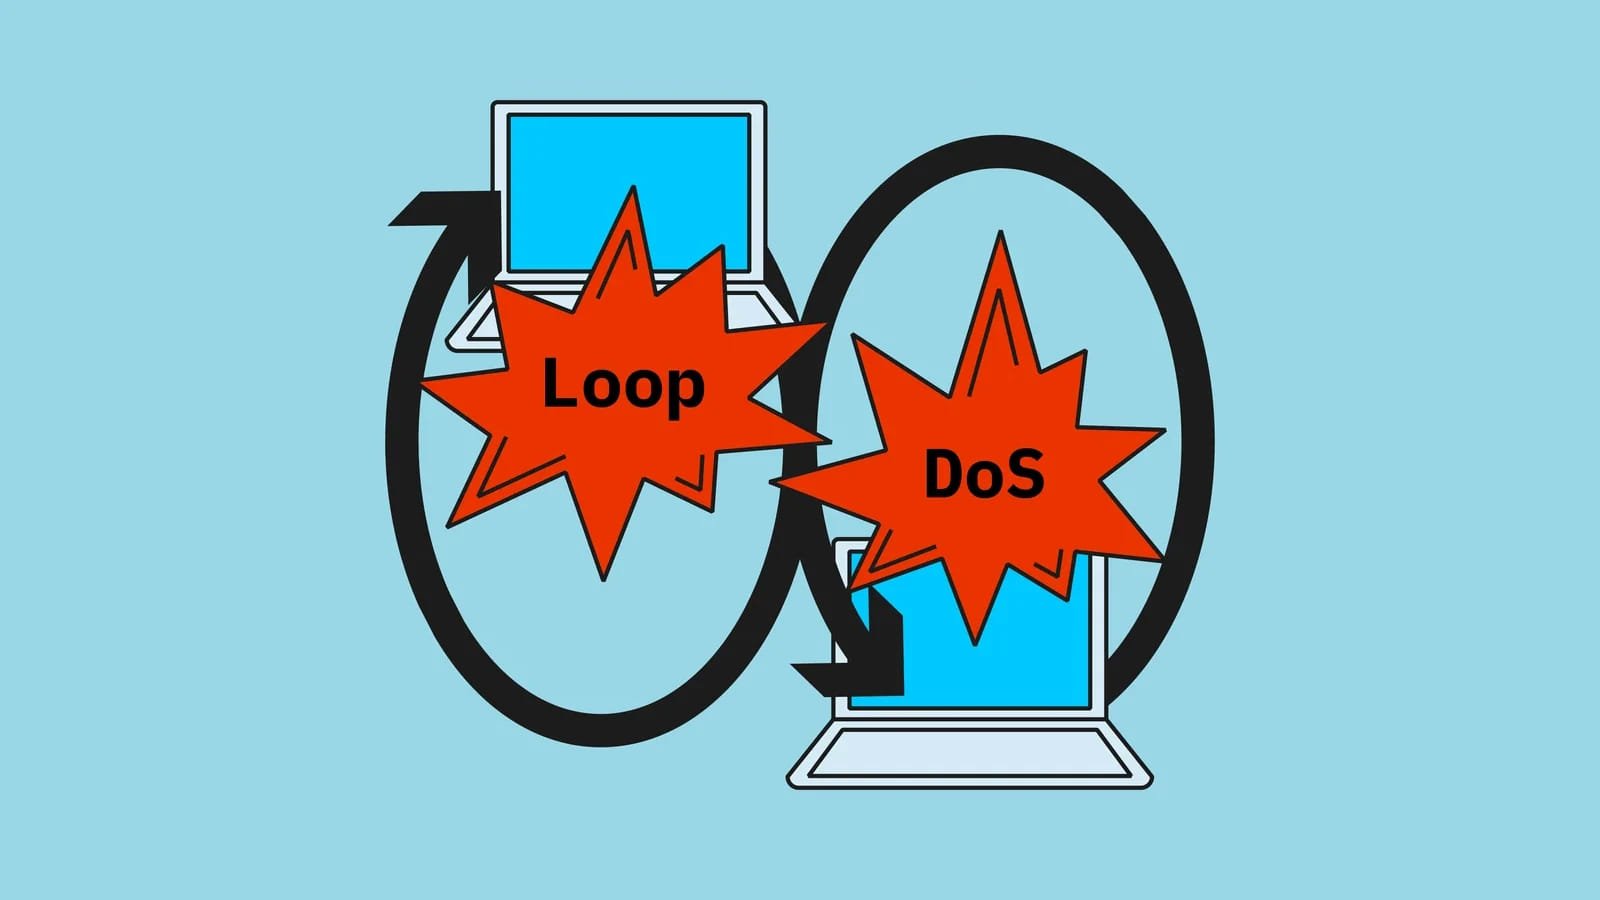 New ‘Loop DoS’ attack may impact up to 300,000 online systems